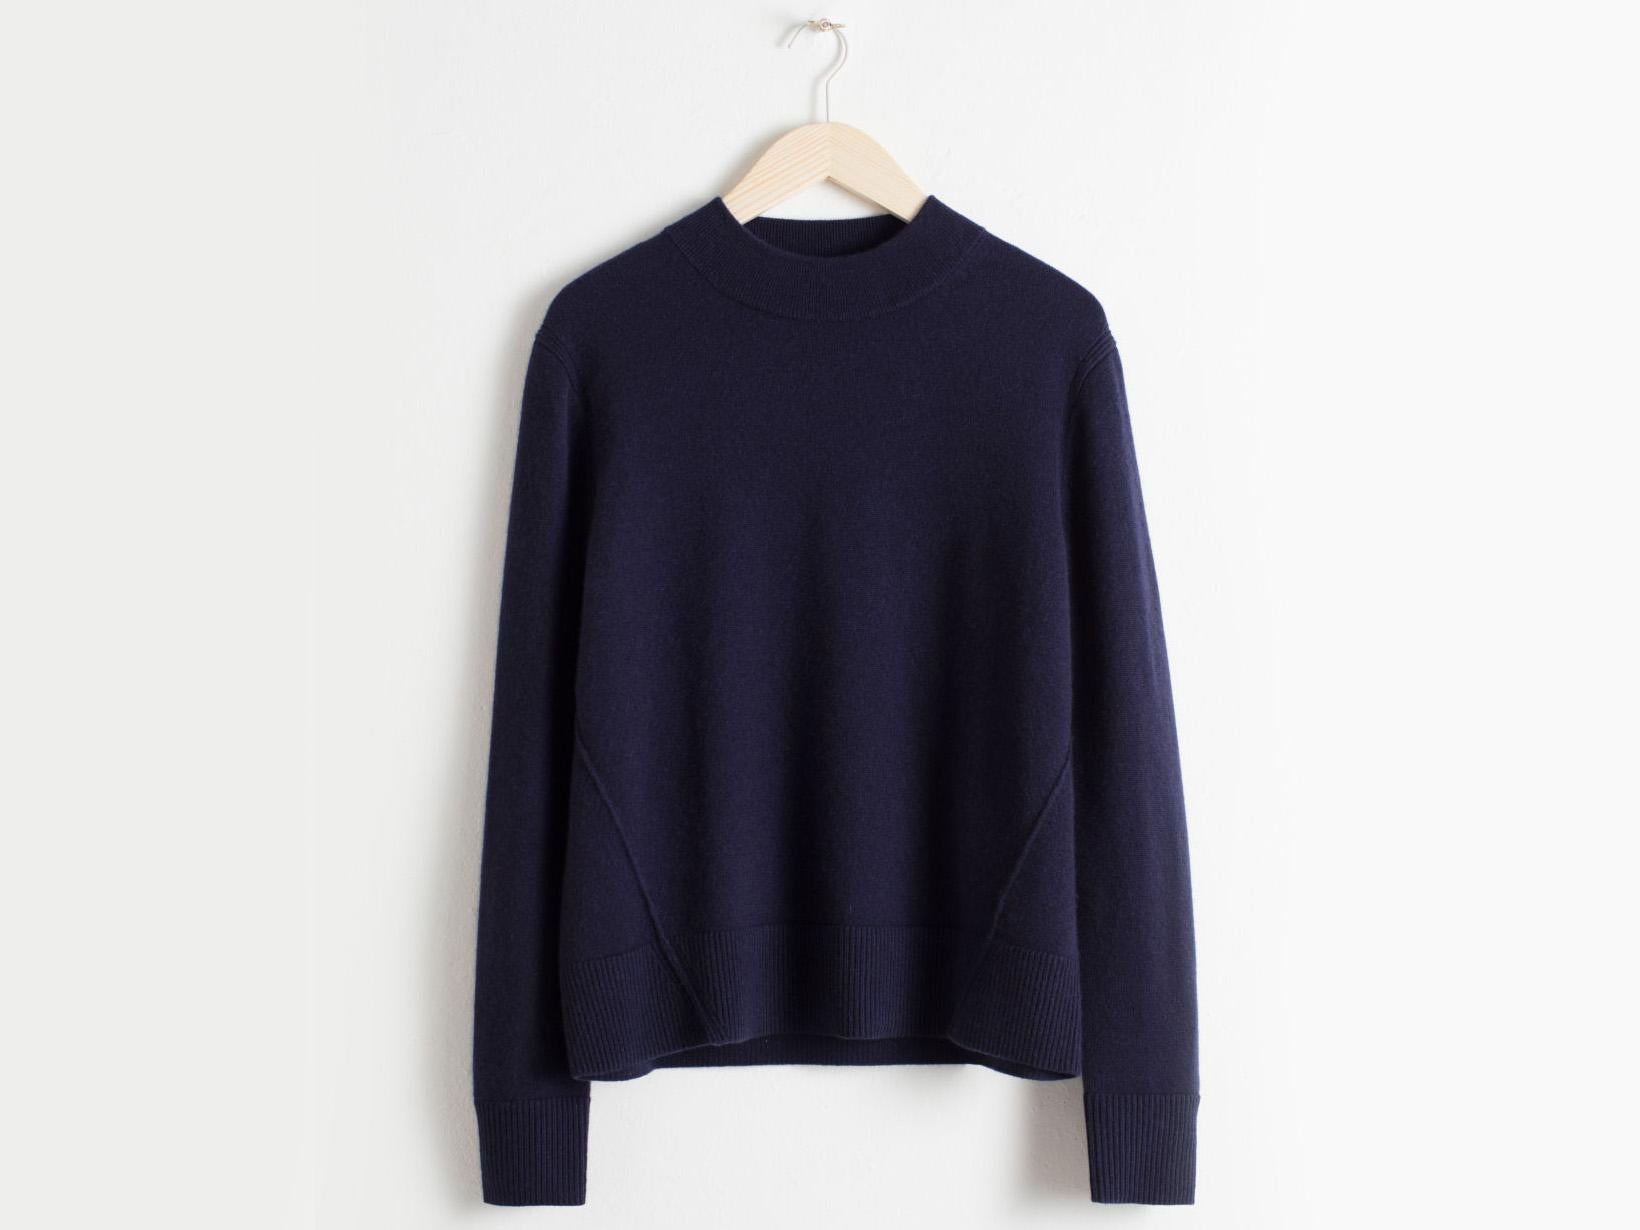 Relaxed Fit Cashmere Sweater, £119, &amp; Other Stories